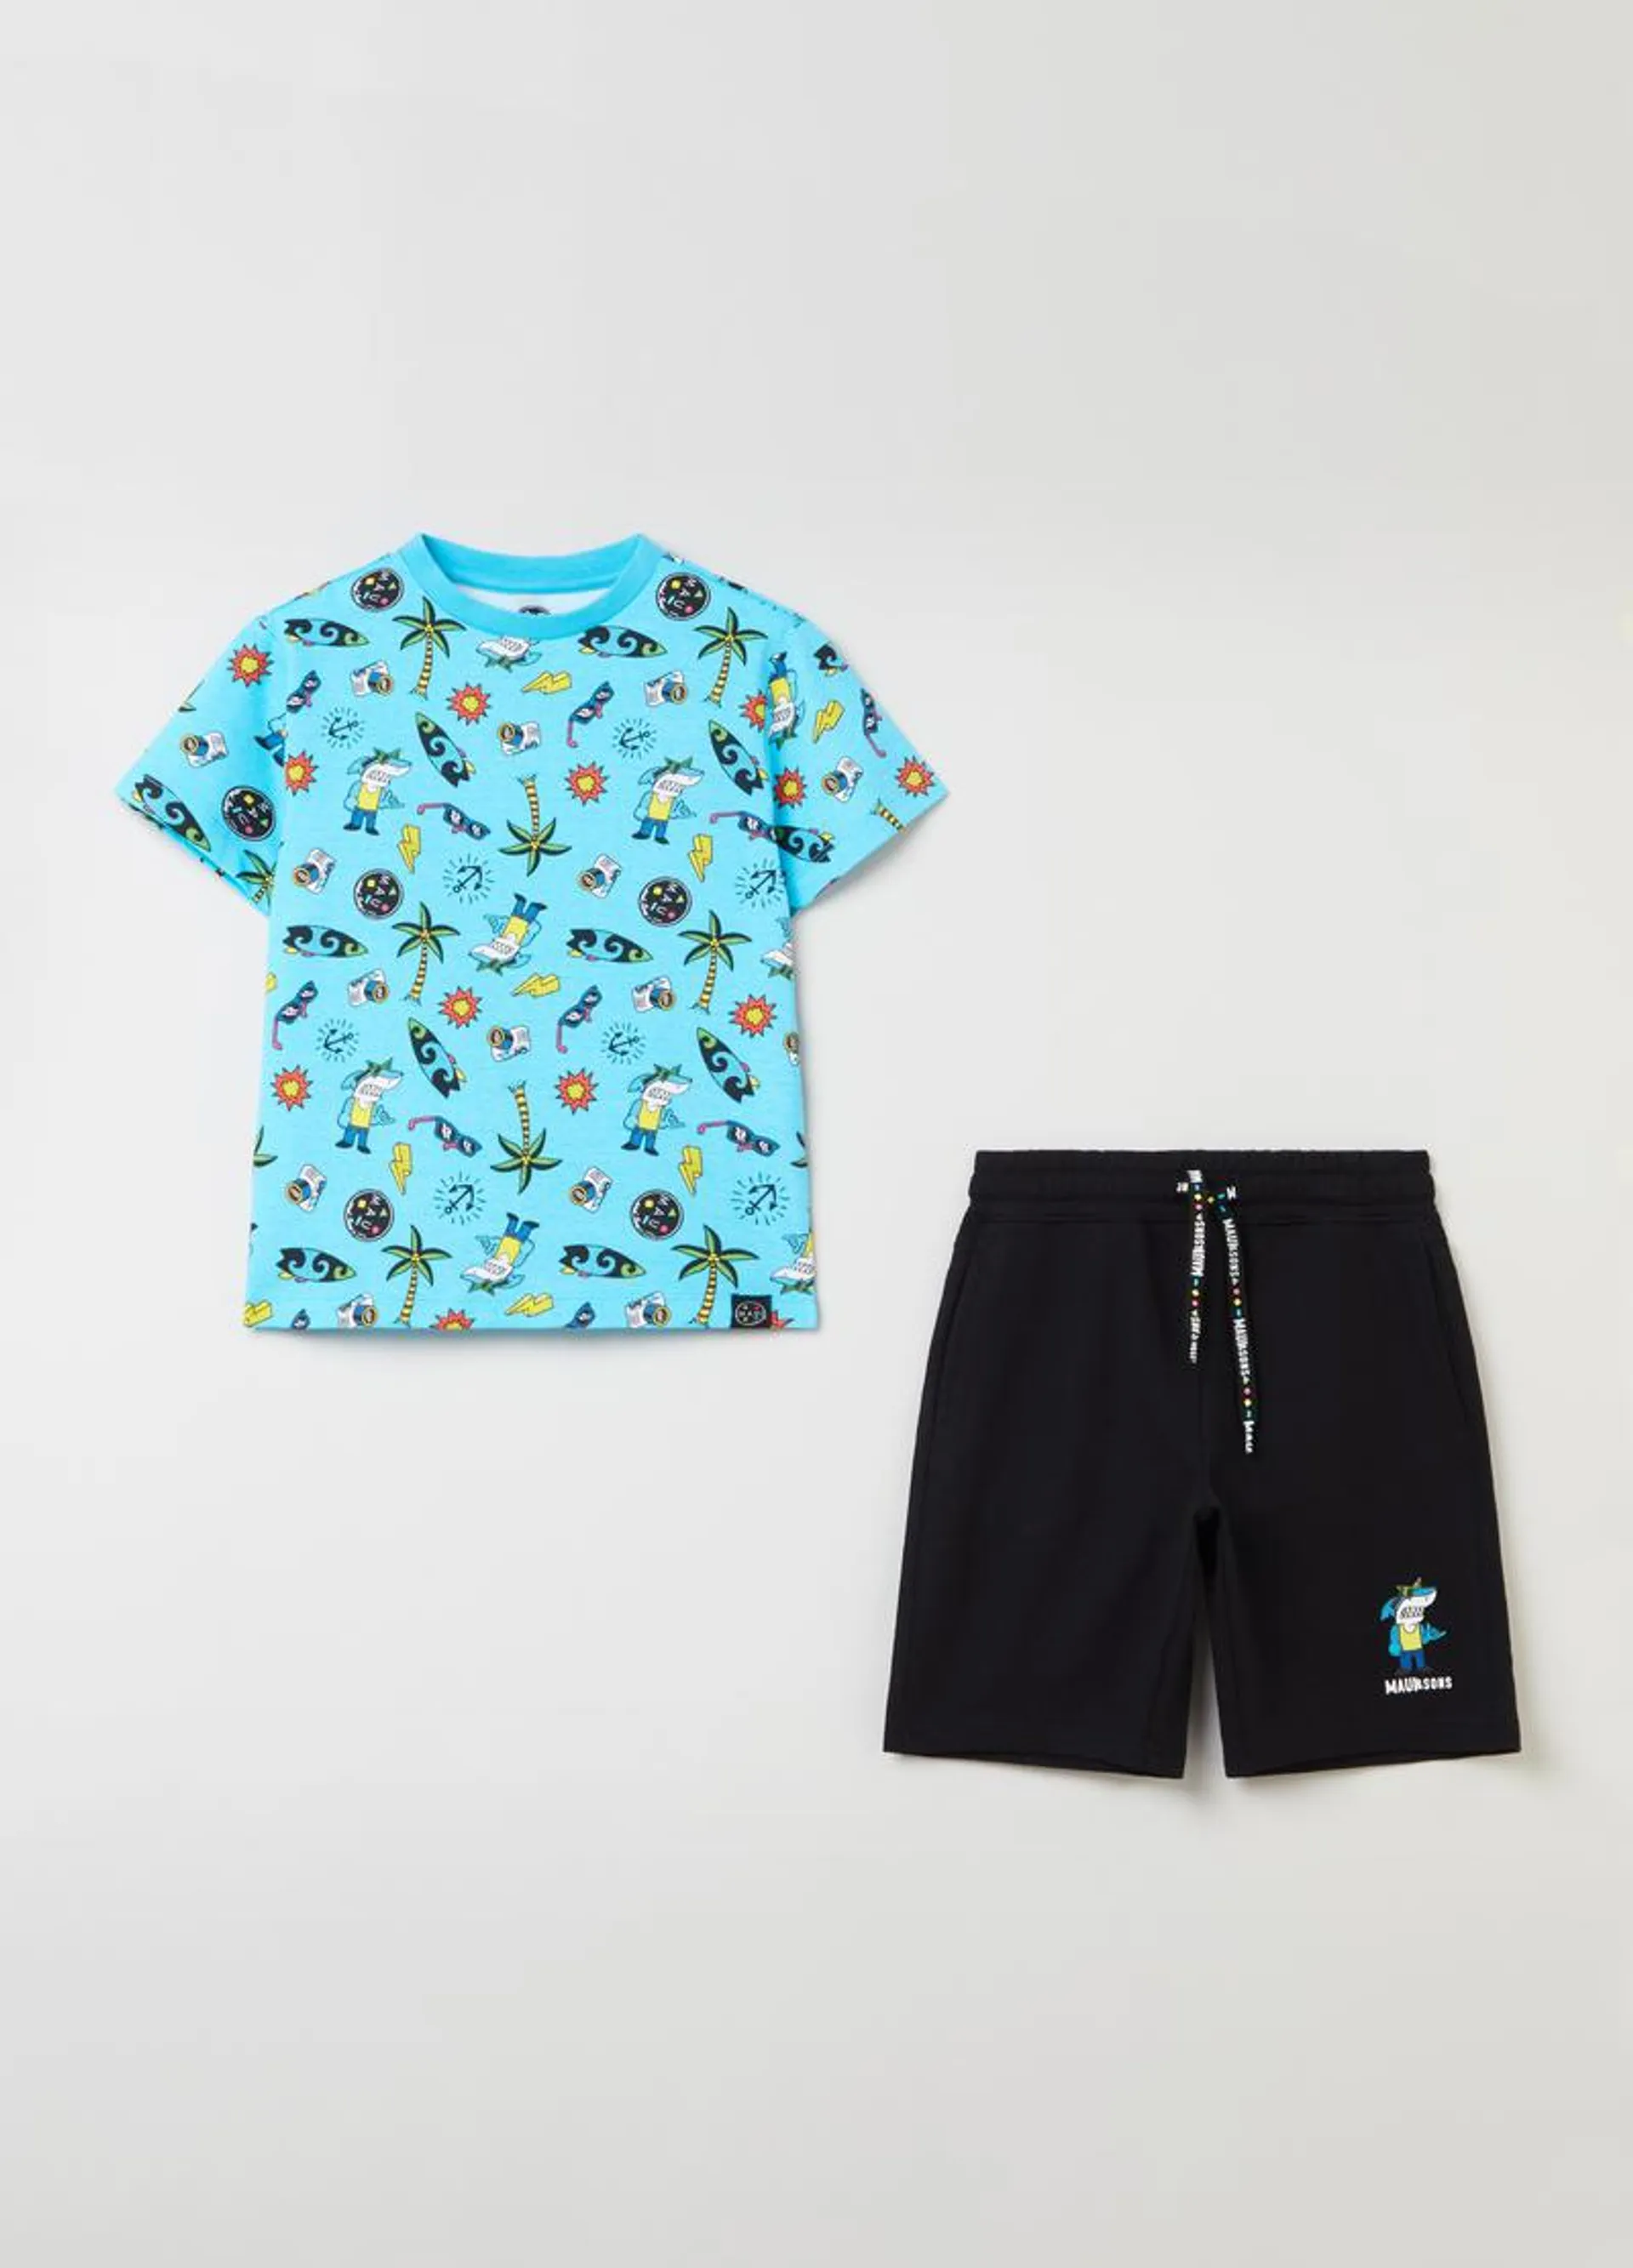 Cotton jogging set by Maui and Sons print